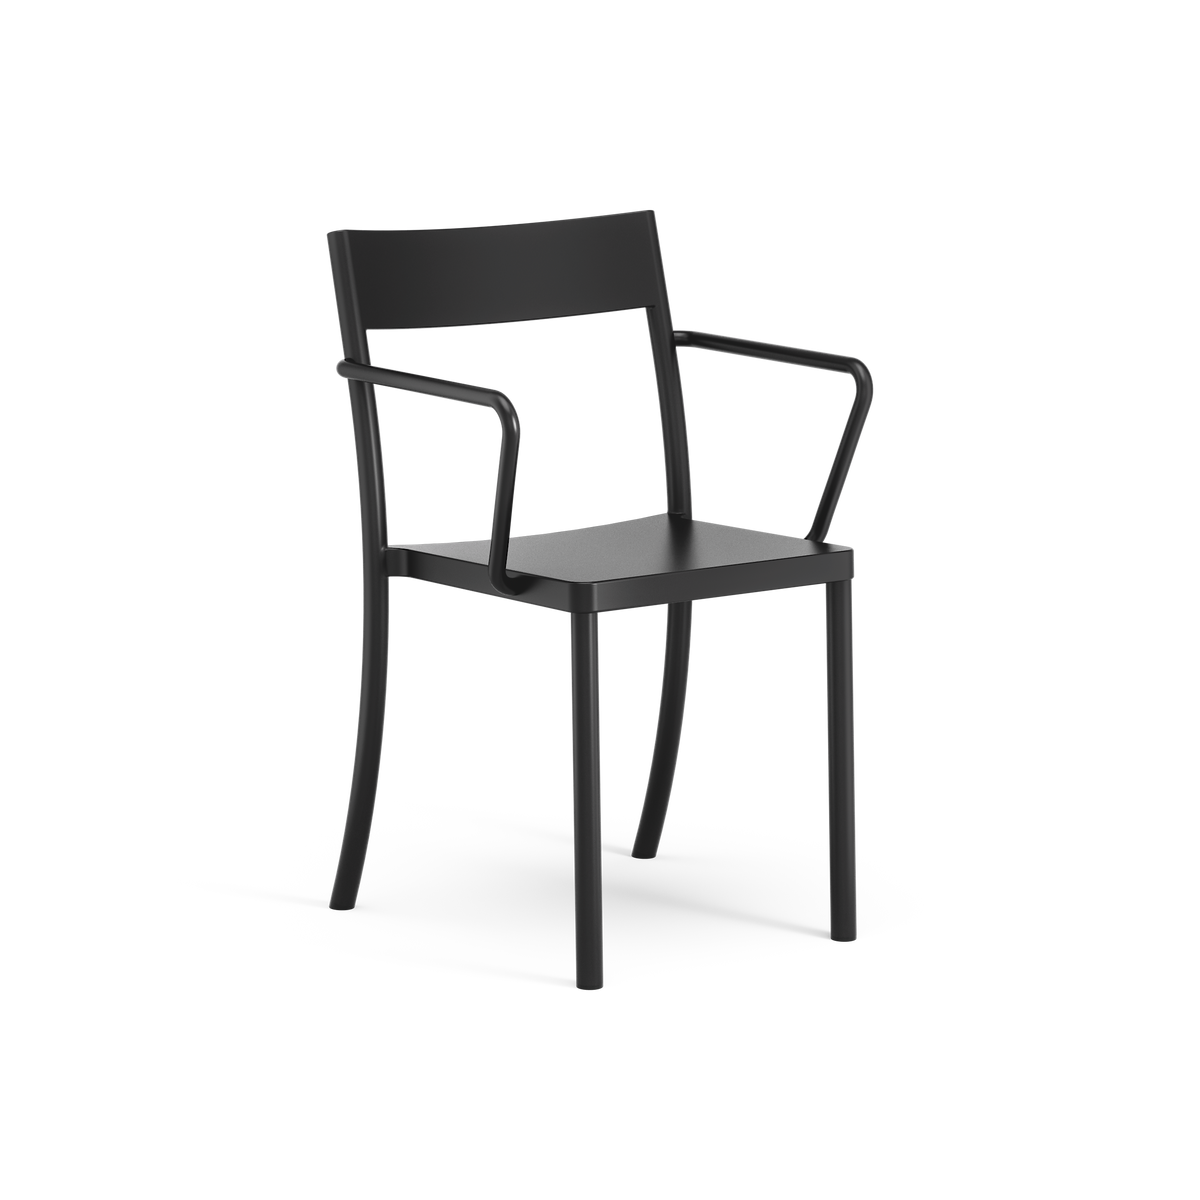 A-stack armchair